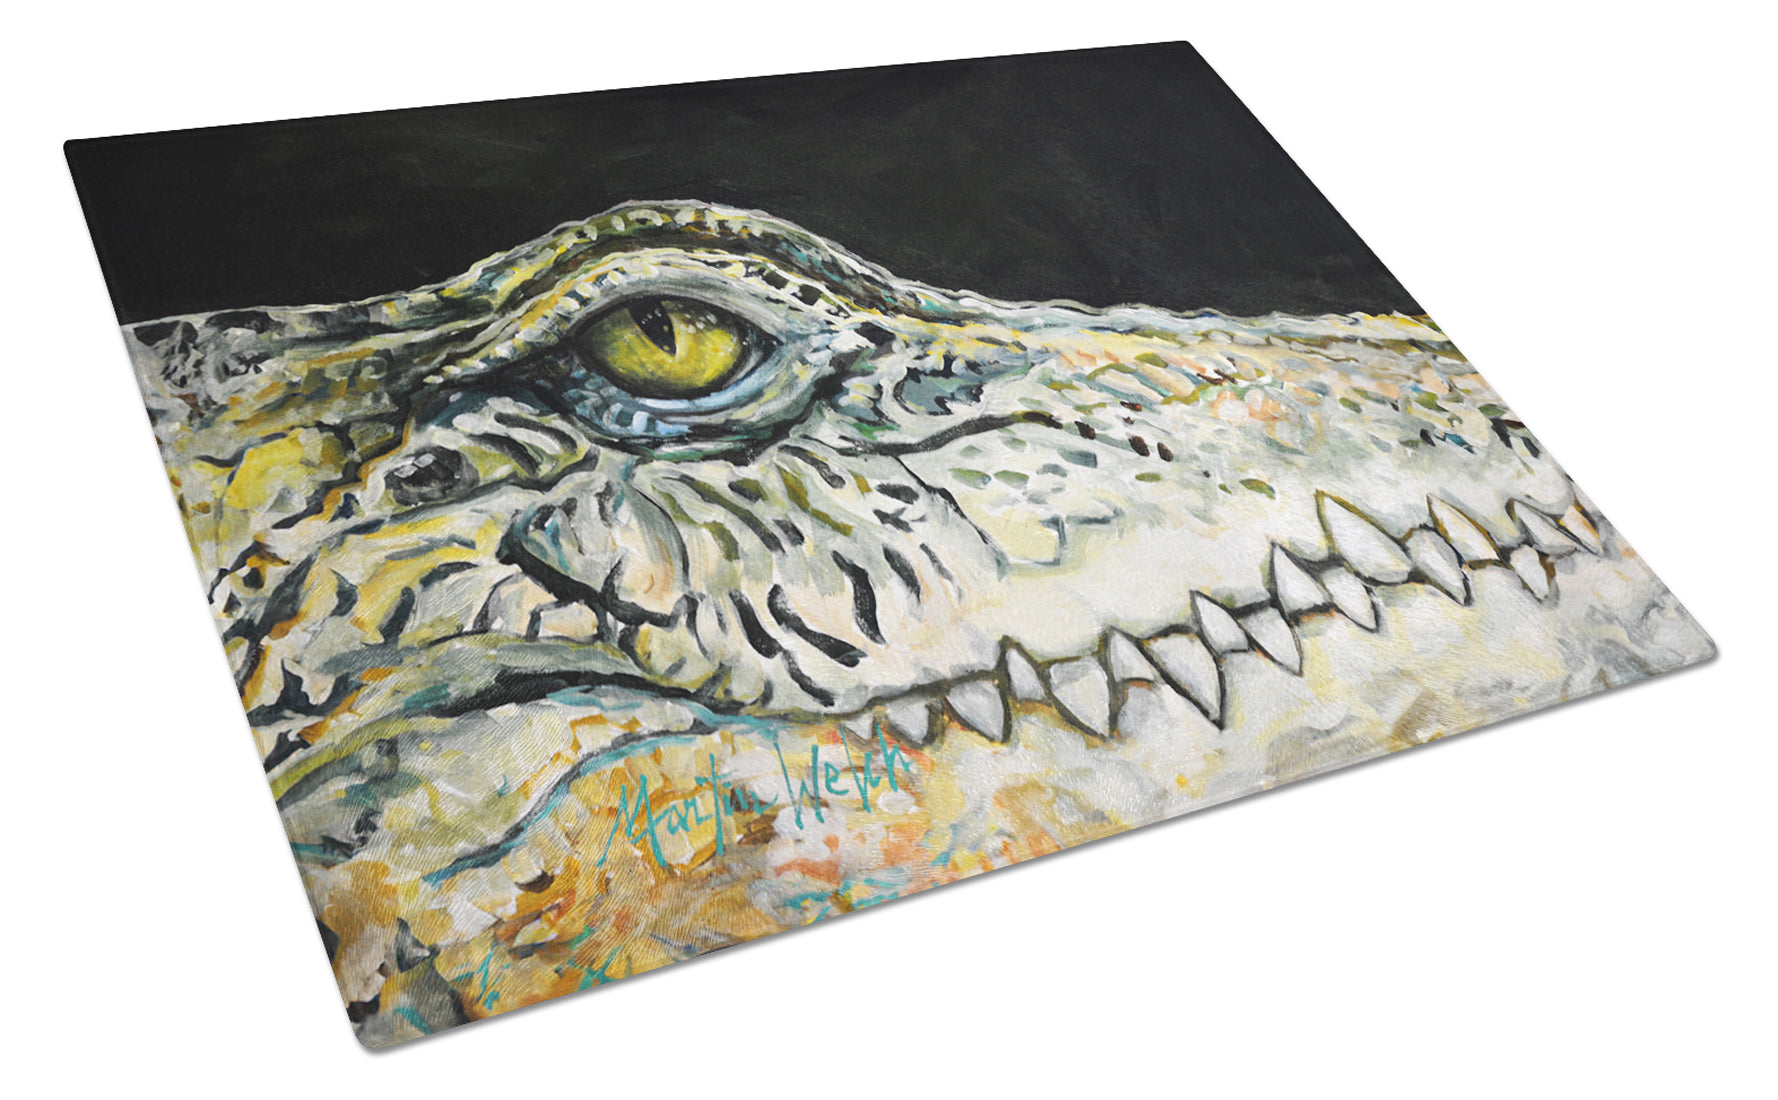 Buy this Bite Me Alligator Glass Cutting Board